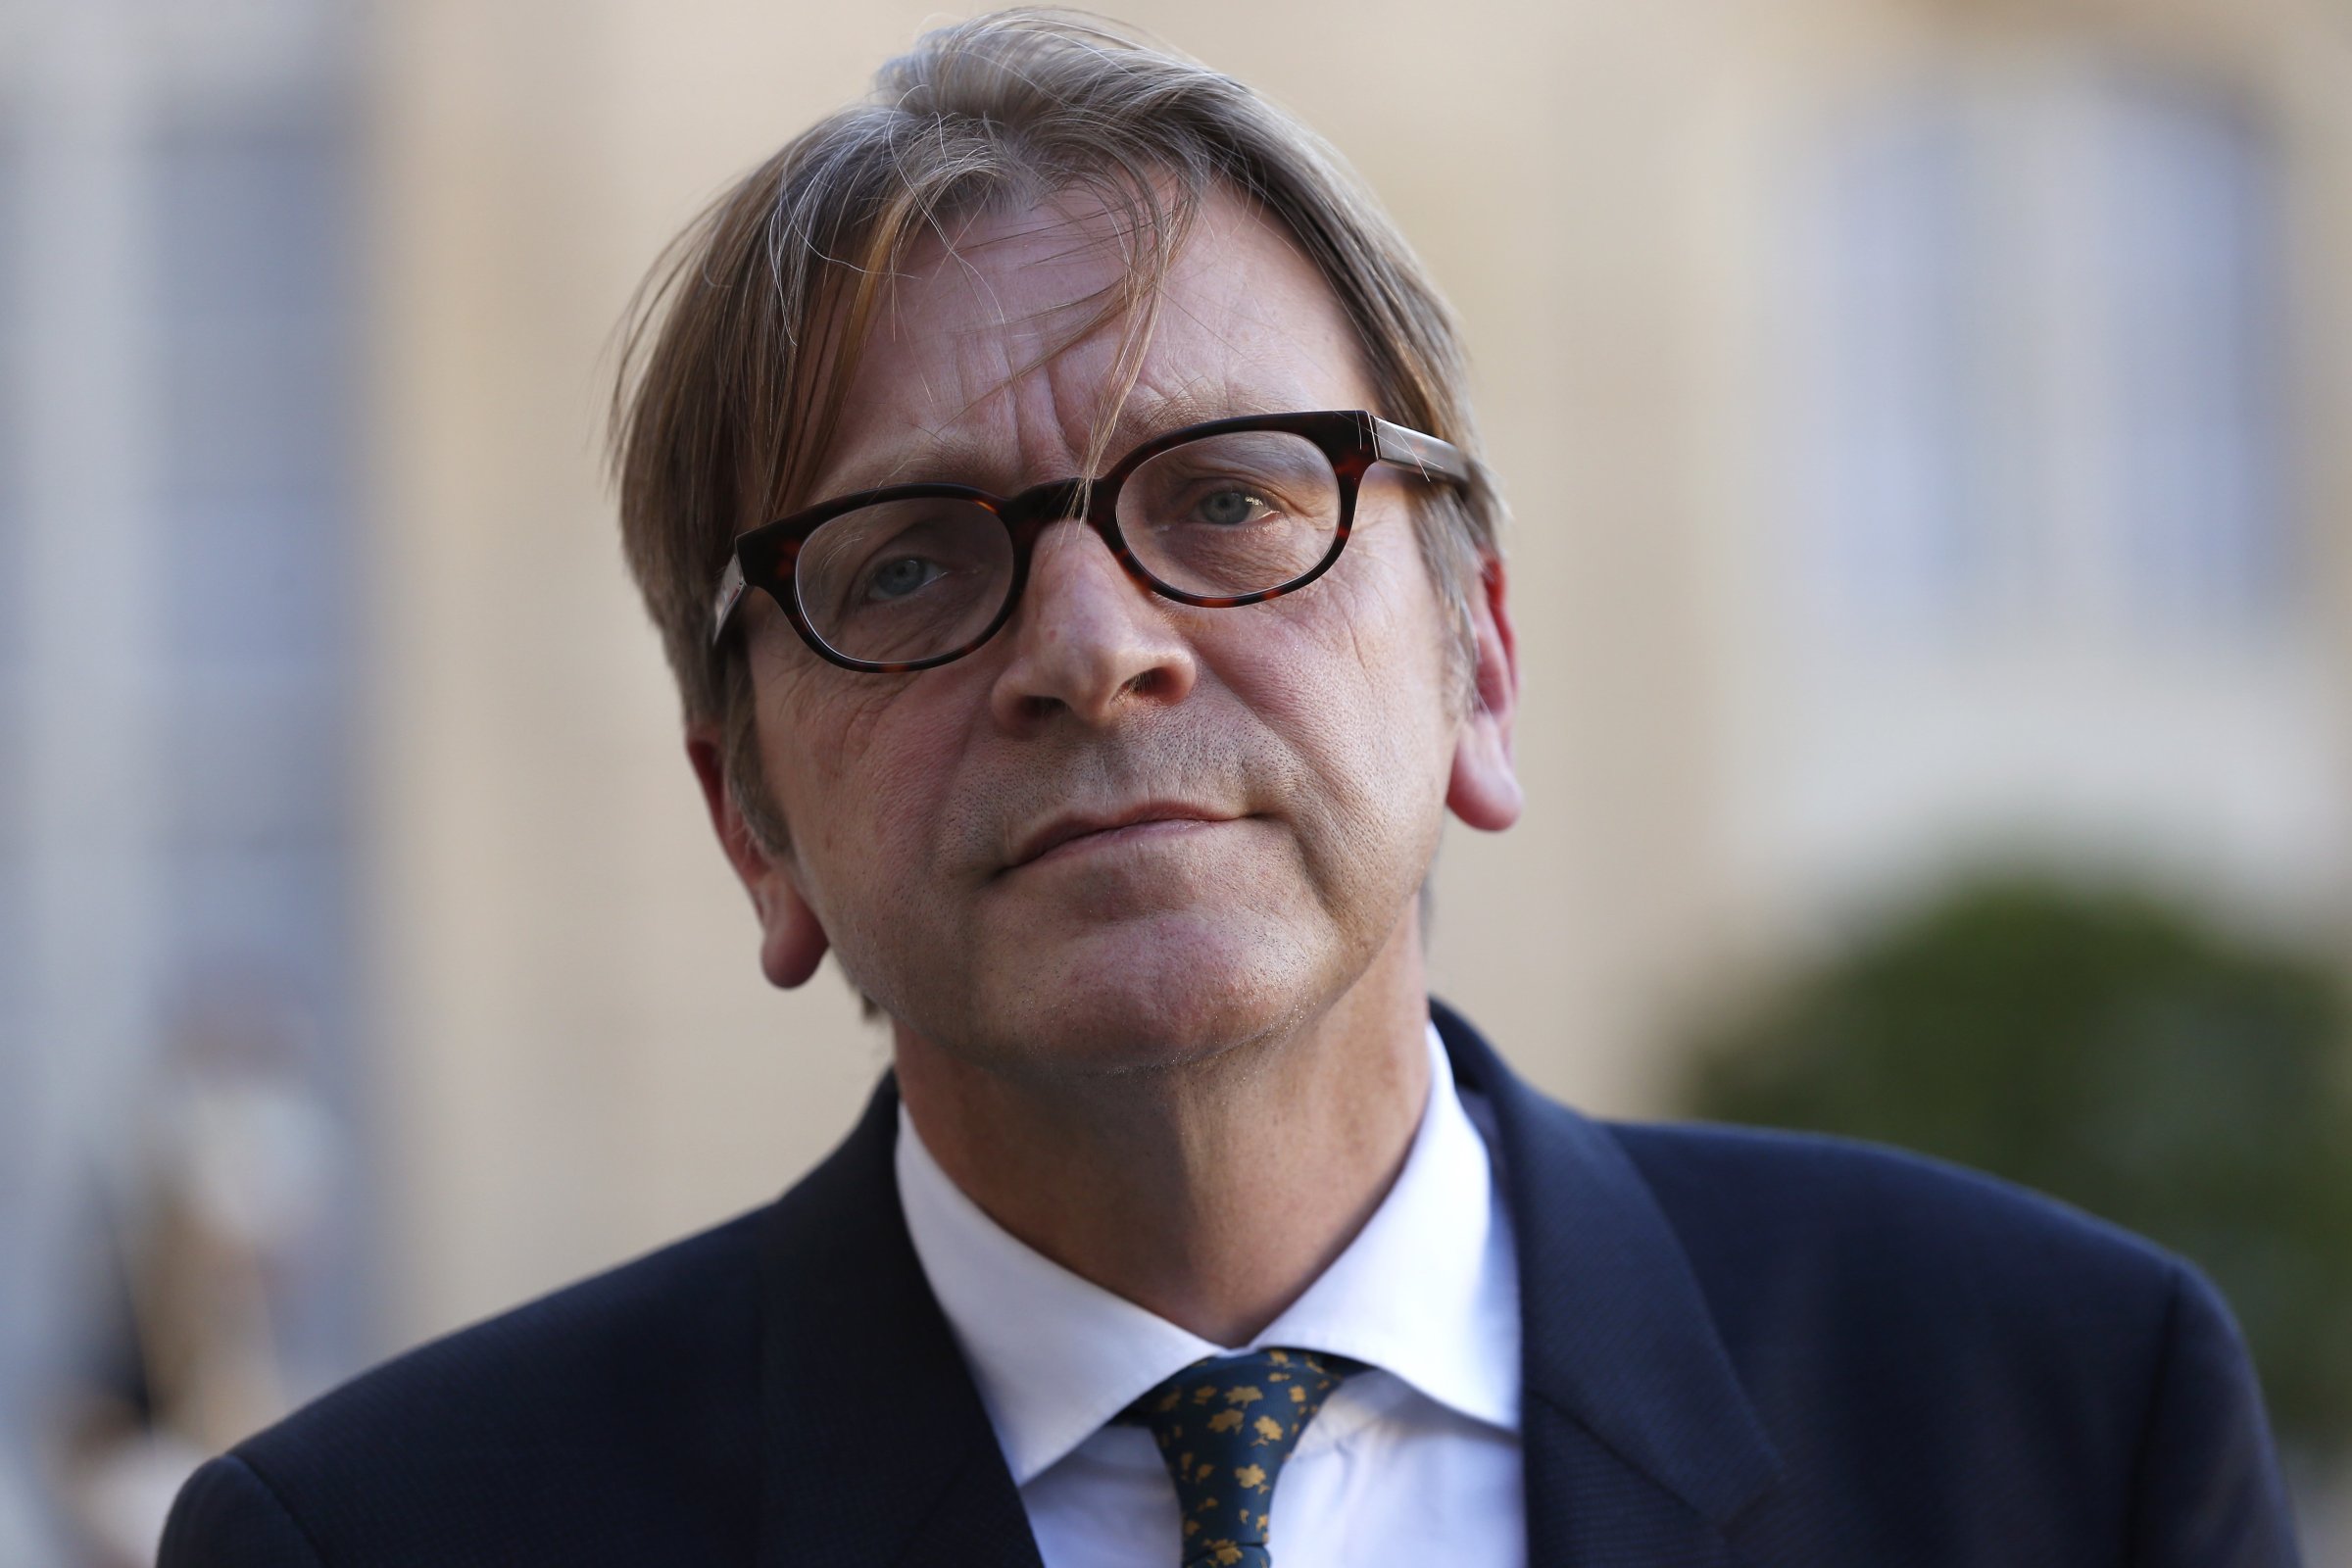 Guy Verhofstadt, Belgian member of the European Parliament, leader of the Alliance of liberals and Democrats for Europe (ALDE) group, and former Belgium prime minister, speaks to journalists after a meeting with French President at the Elysee Presidential Palace, in Paris on Sept. 29, 2015.